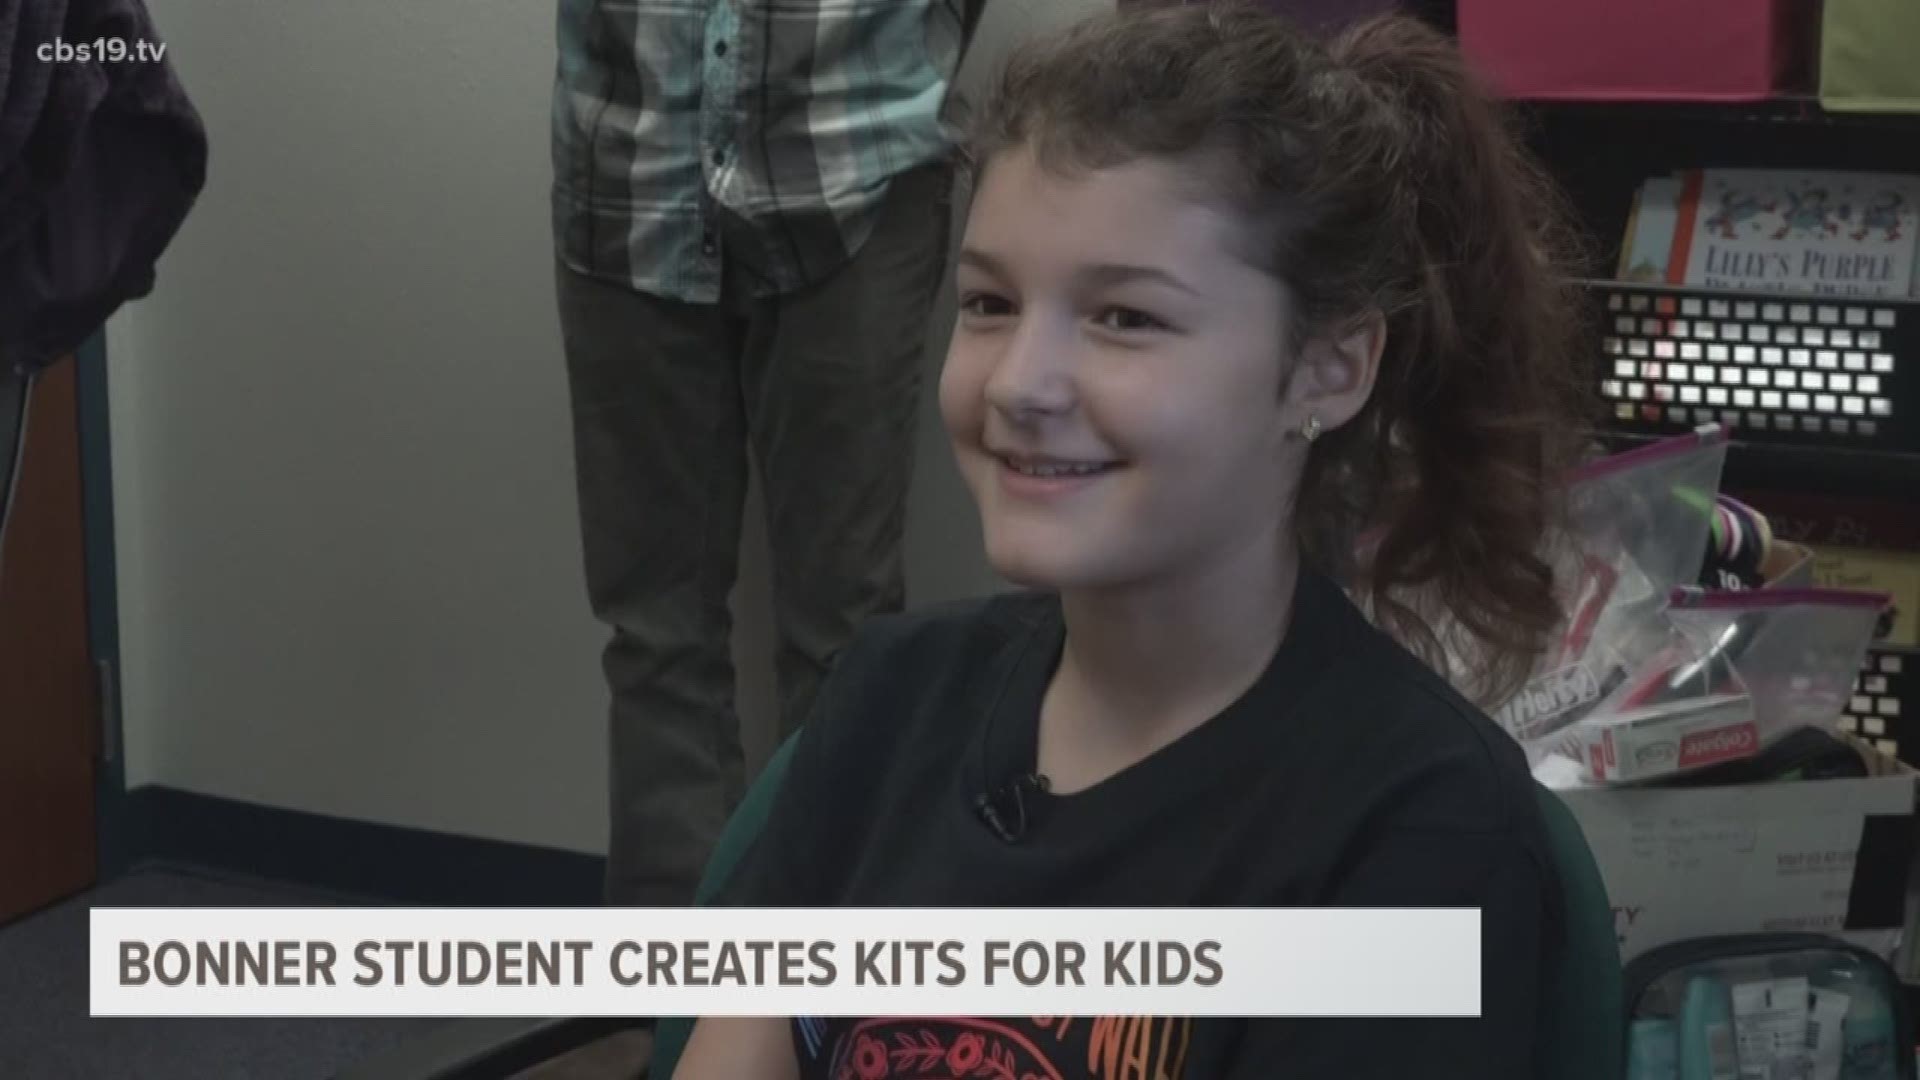 A Bonner Elementary School Student creates hygiene kits for students after seeing one in need. With the help of Isabella Sains parents, she reached out to people through a Facebook post resulting in many at her door step.